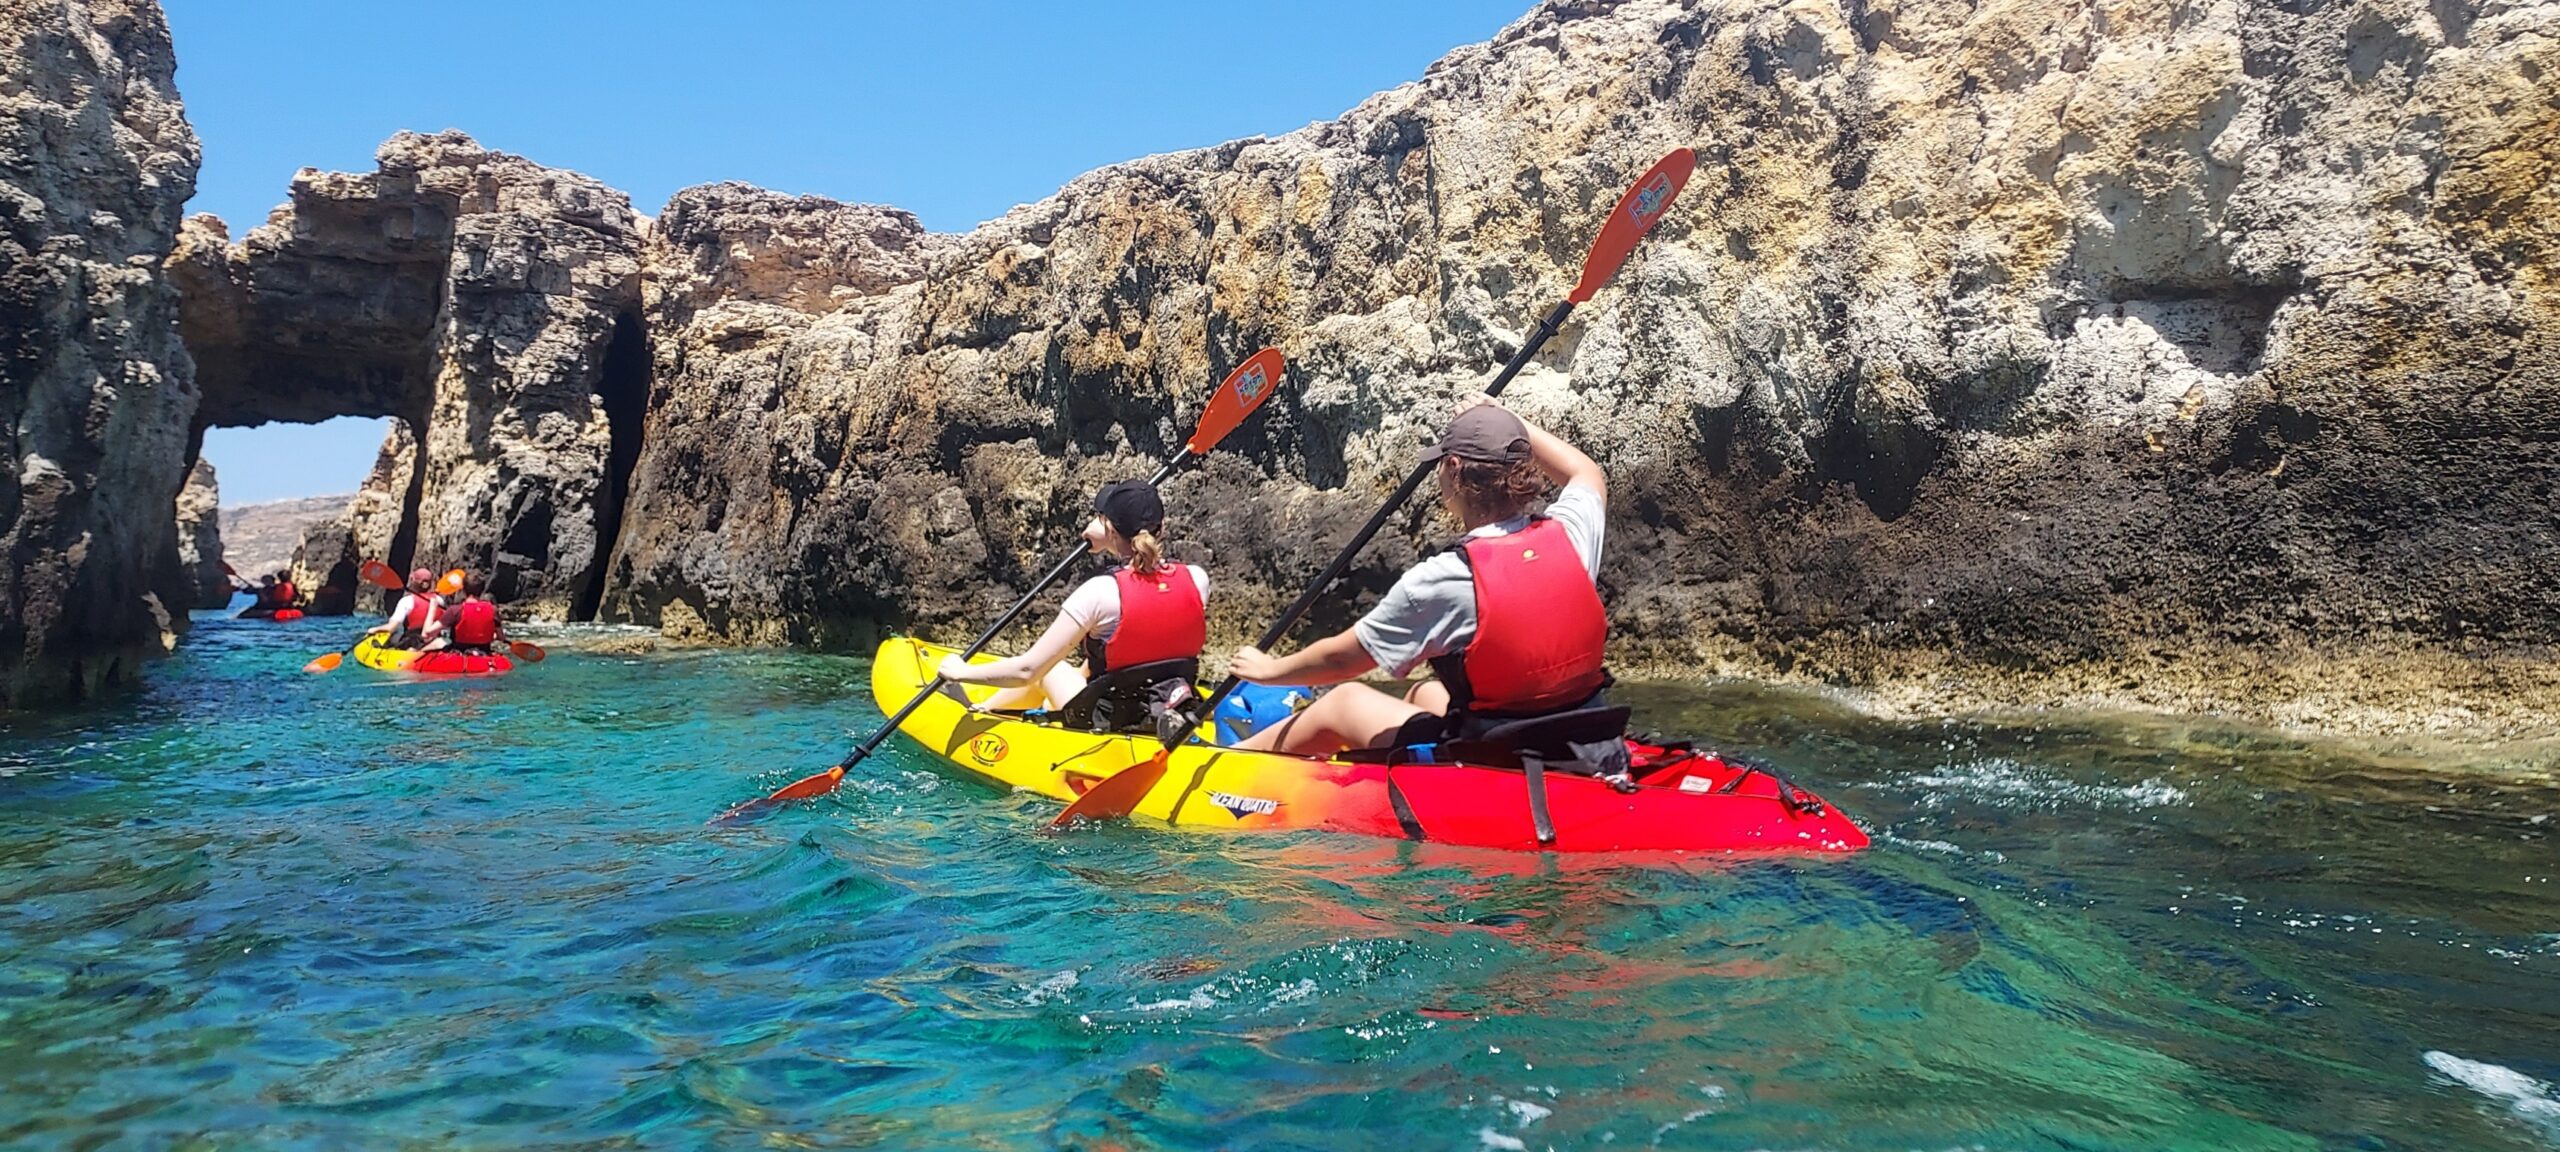 If you’re nervous about trying sea kayaking